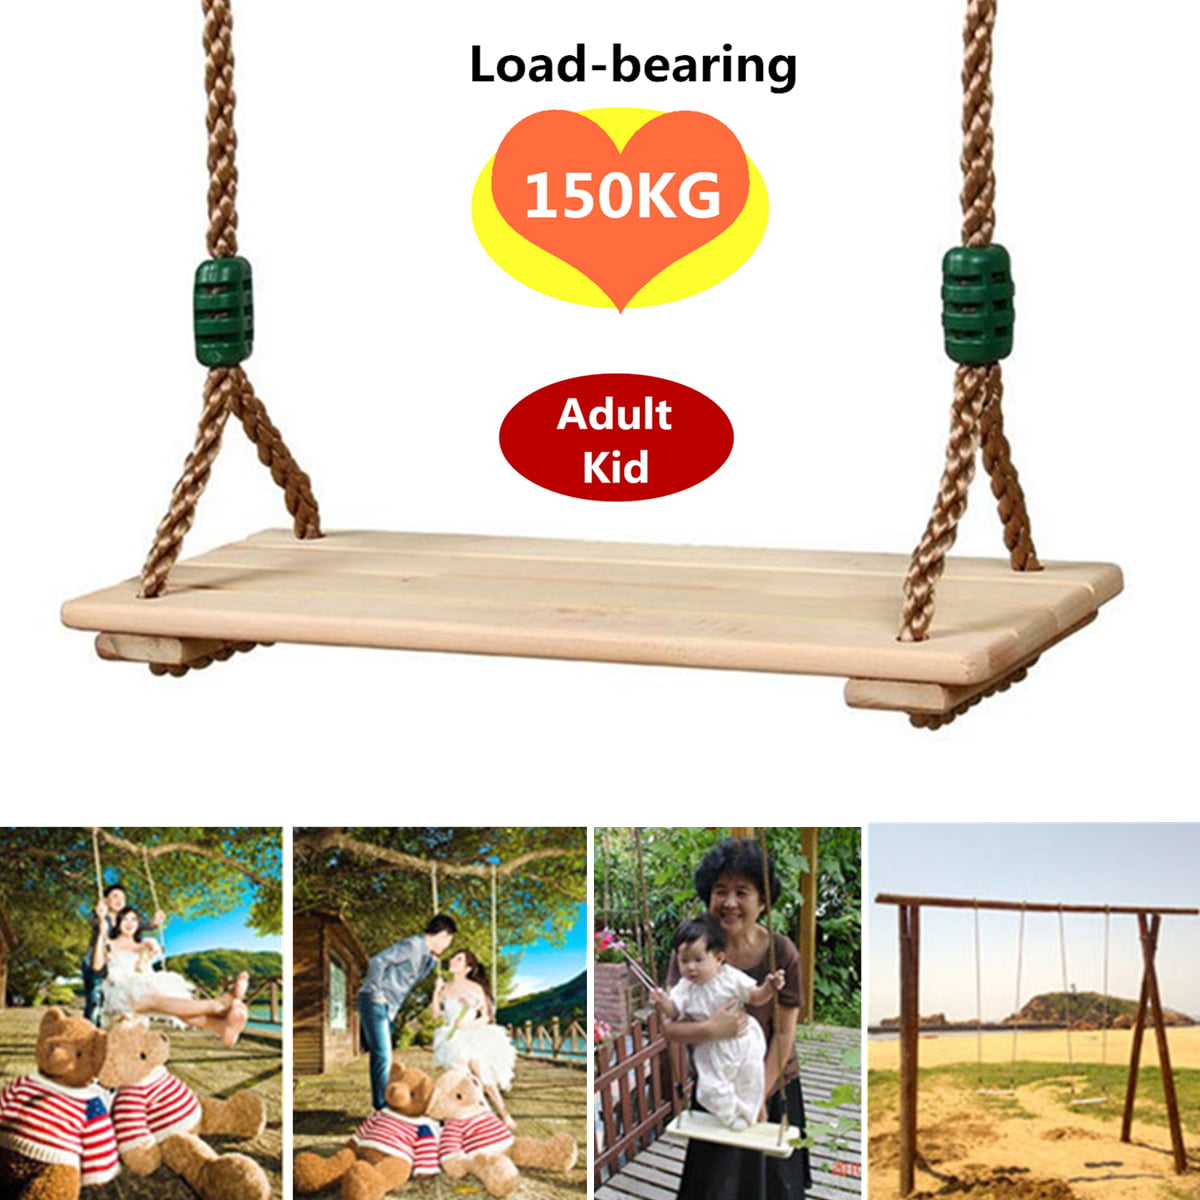 150KG Load-Bearing Wooden Swings Seat Child Adult Indoor Outdoor Yard Swing Play 